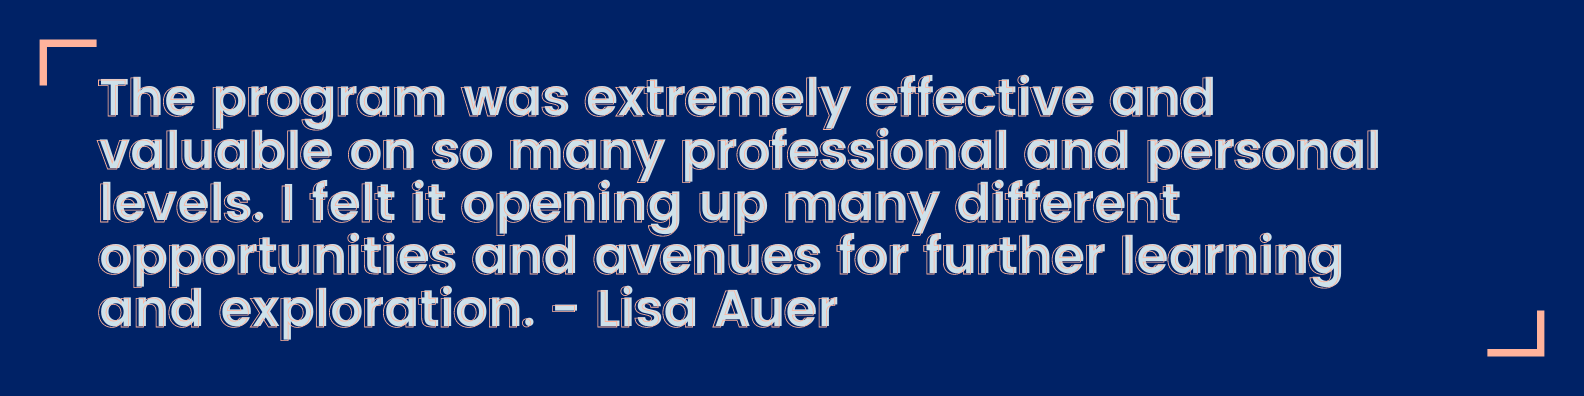 The program was extremely effective and valuable on so many professional and personal levels. I felt it opening up many different opportunities and avenues for further learning and exploration. - Lisa Auer